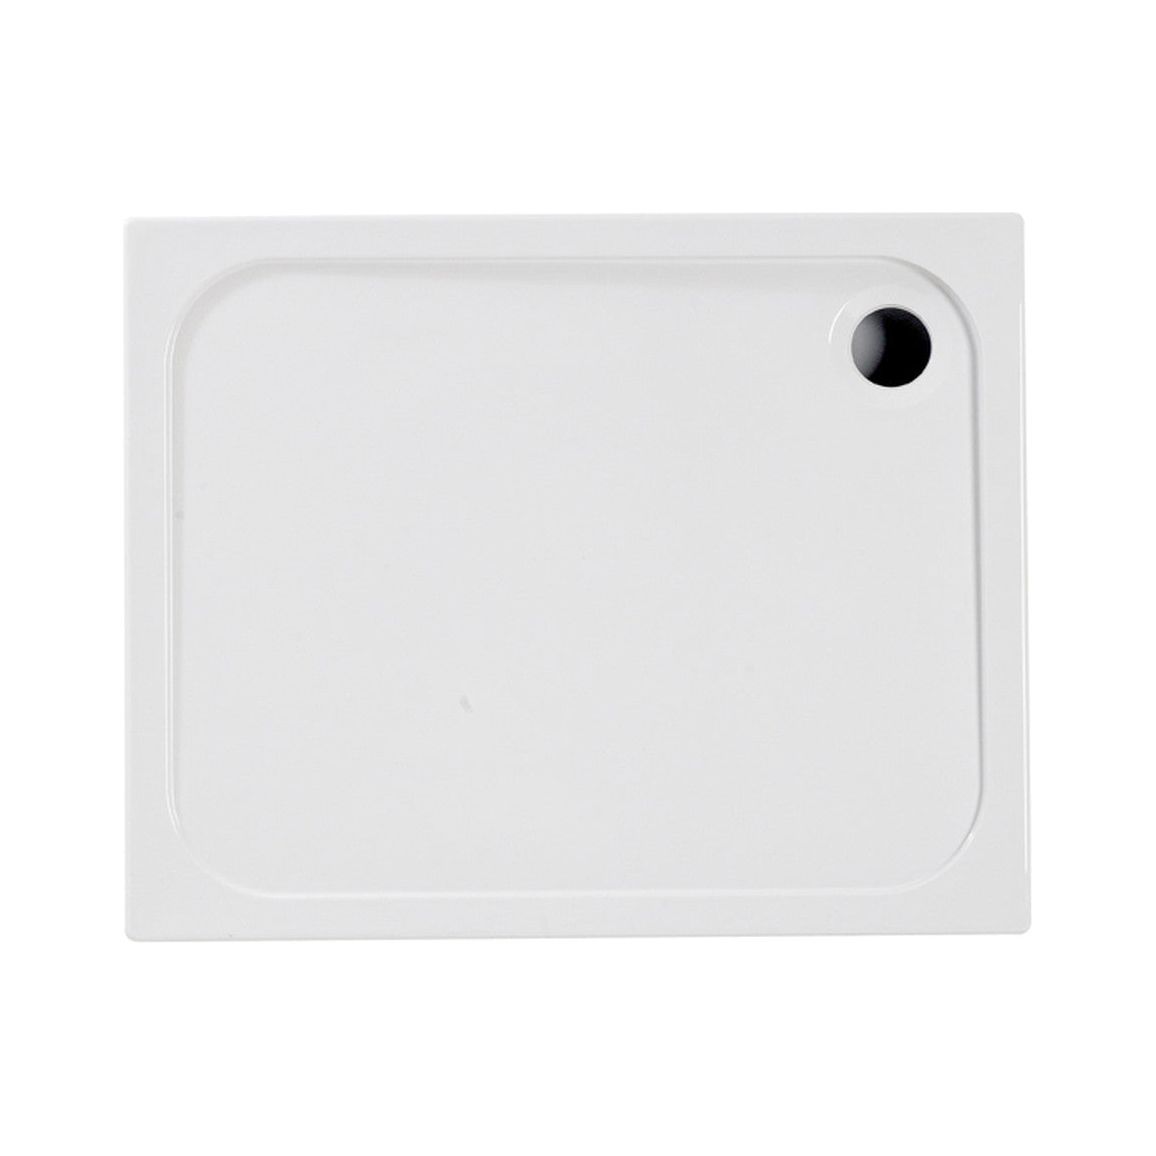 45mm Low Profile 1200x800mm Rectangular Tray & Waste